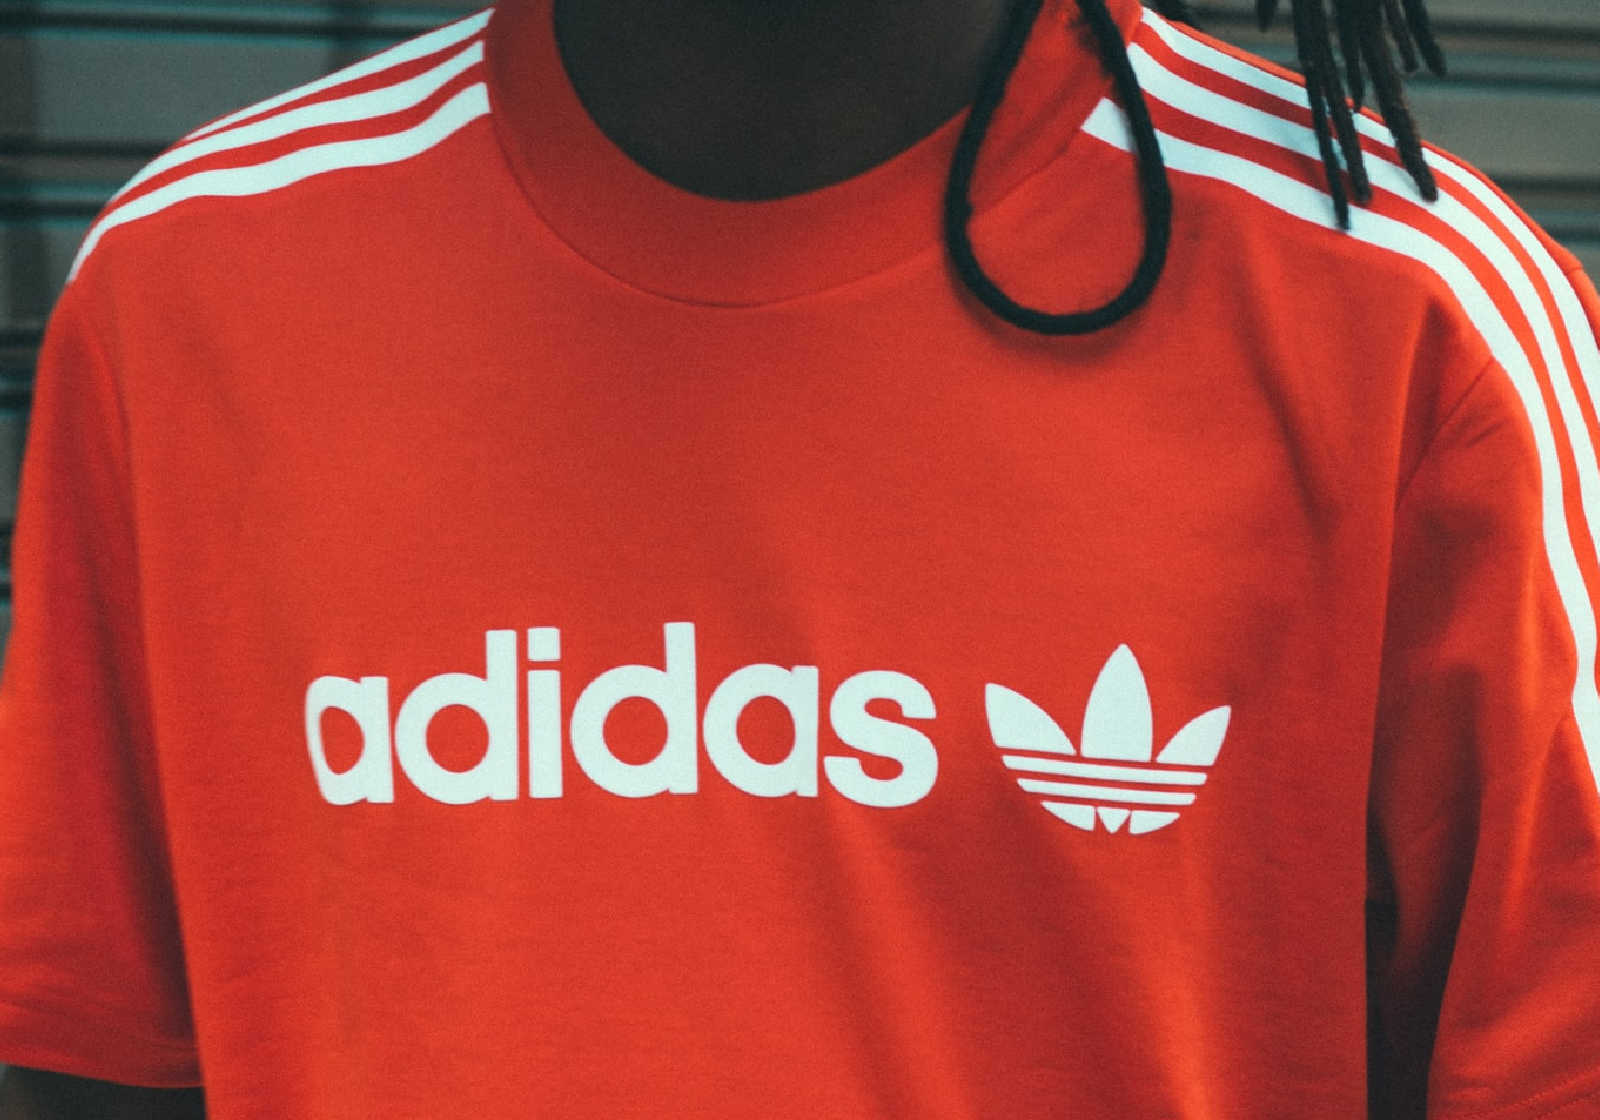 Man United 21/22 kit to feature a detail not seen on any Adidas kits since the early 90s